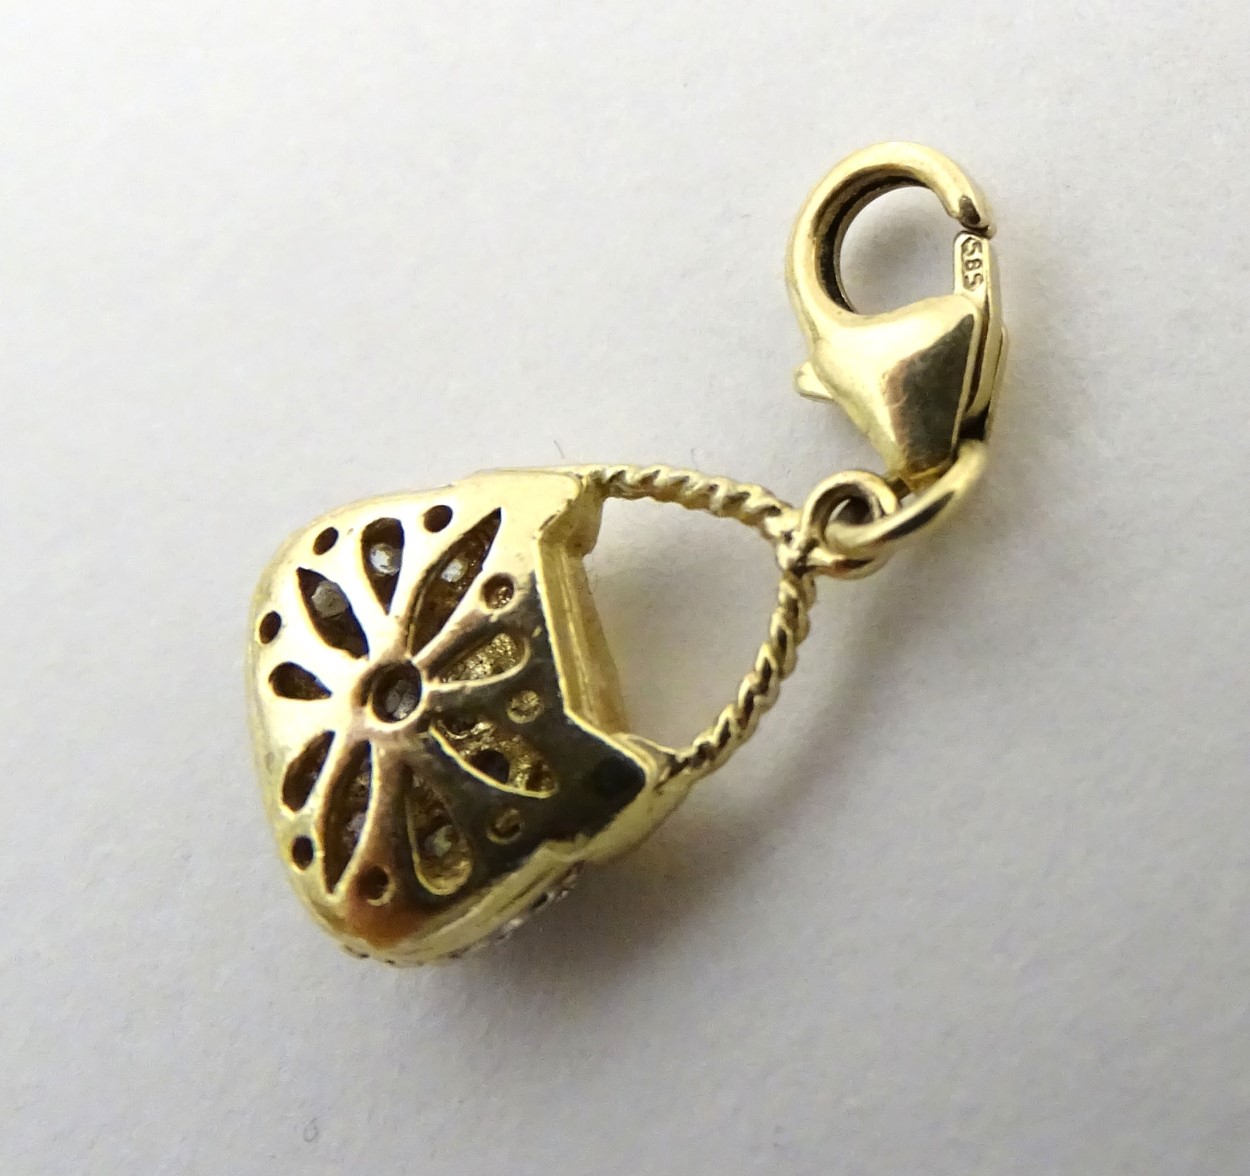 A 14ct gold pendant / fob formed as a basket set with white stones. - Image 3 of 5